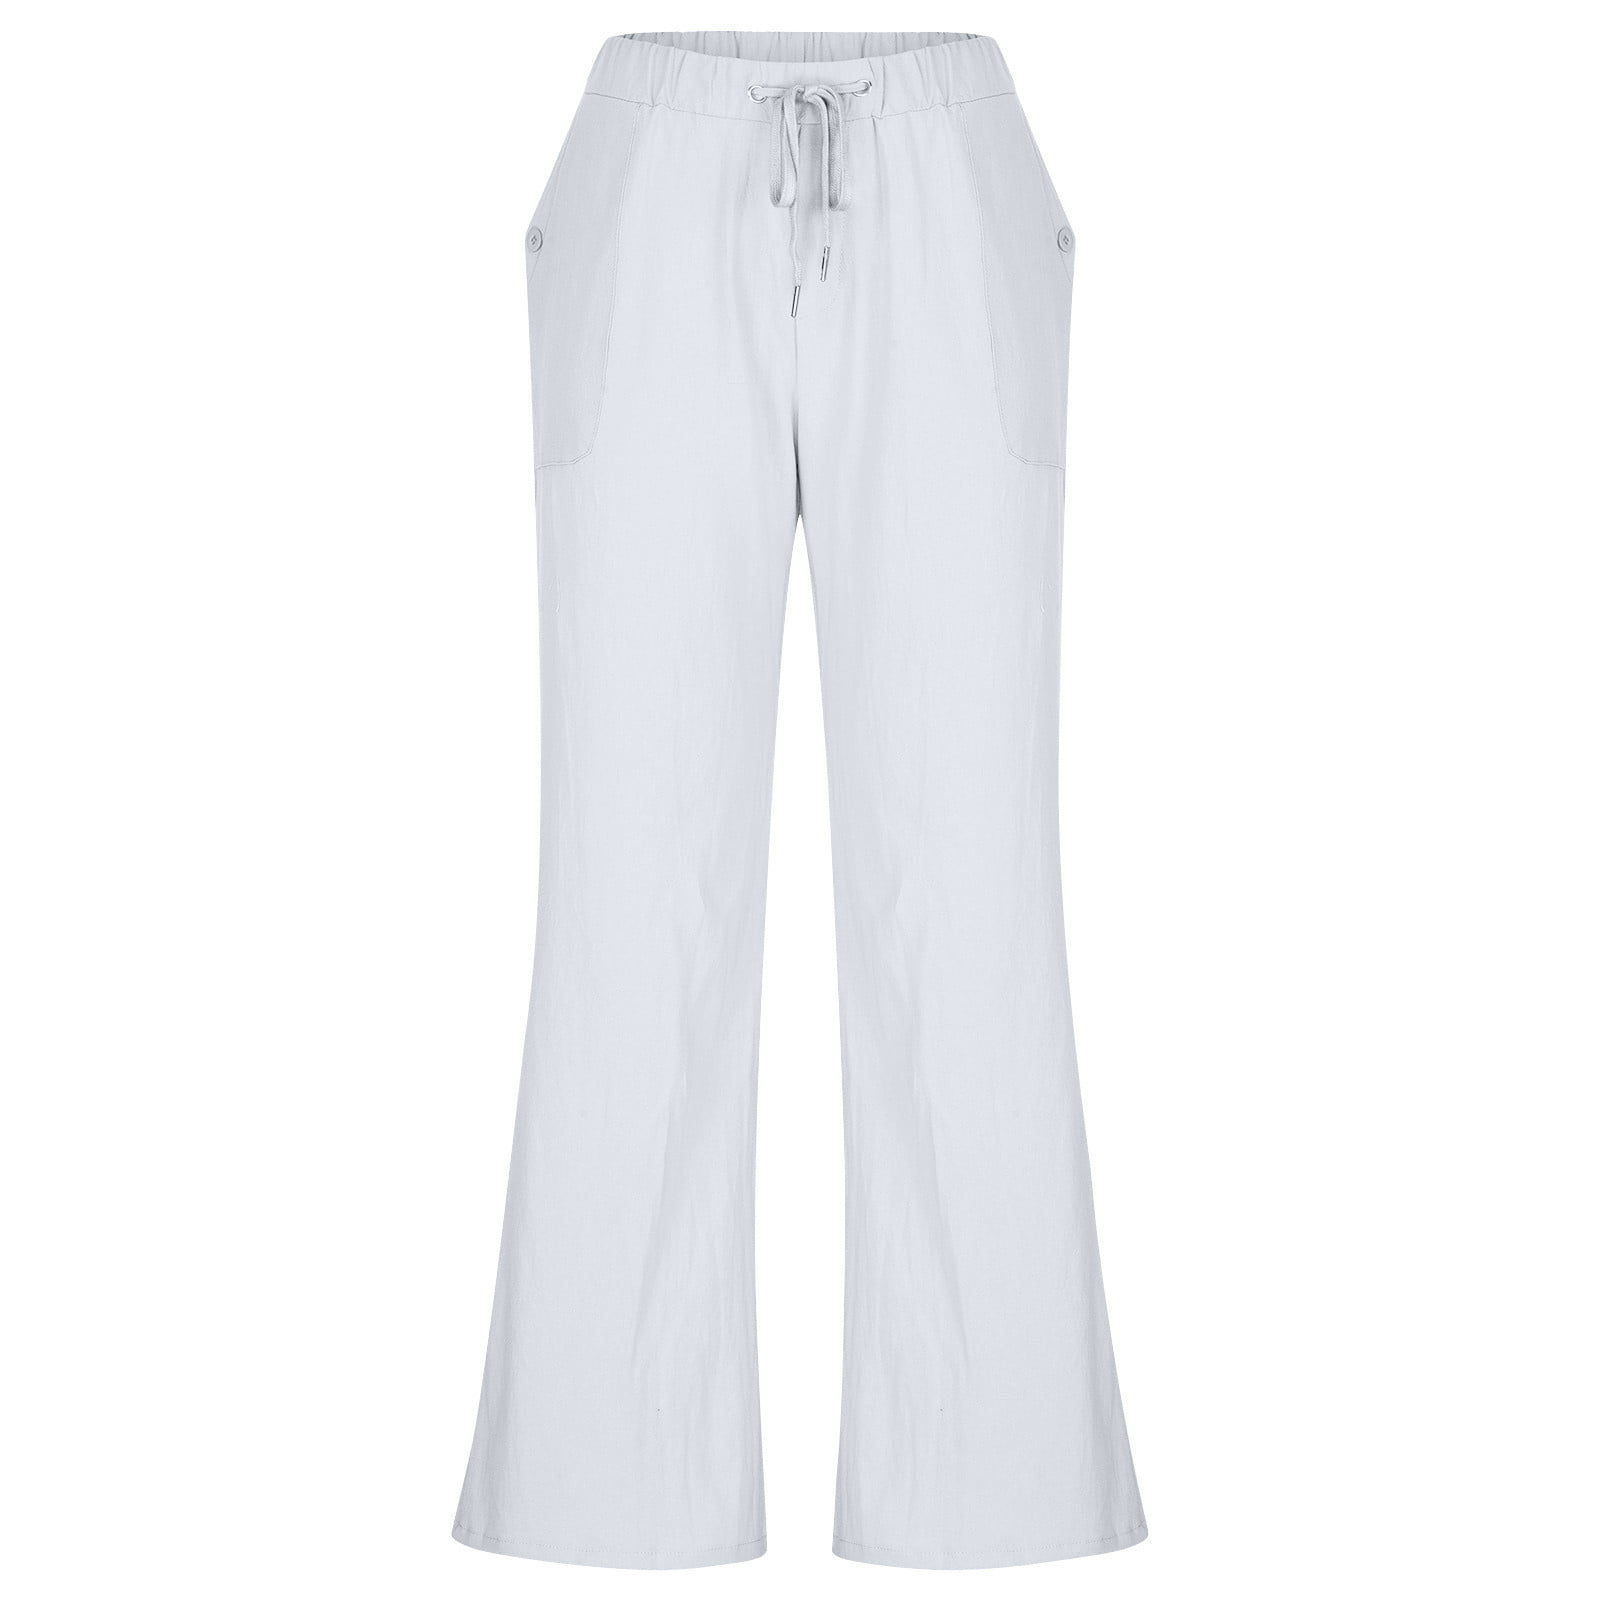 Fashion (white 3)Cotton Linen Pants Women Soft Loose Sports Pants  Breathable Slim Ankle Length Trousers Korean Leisure Fitness Pants WEF @  Best Price Online